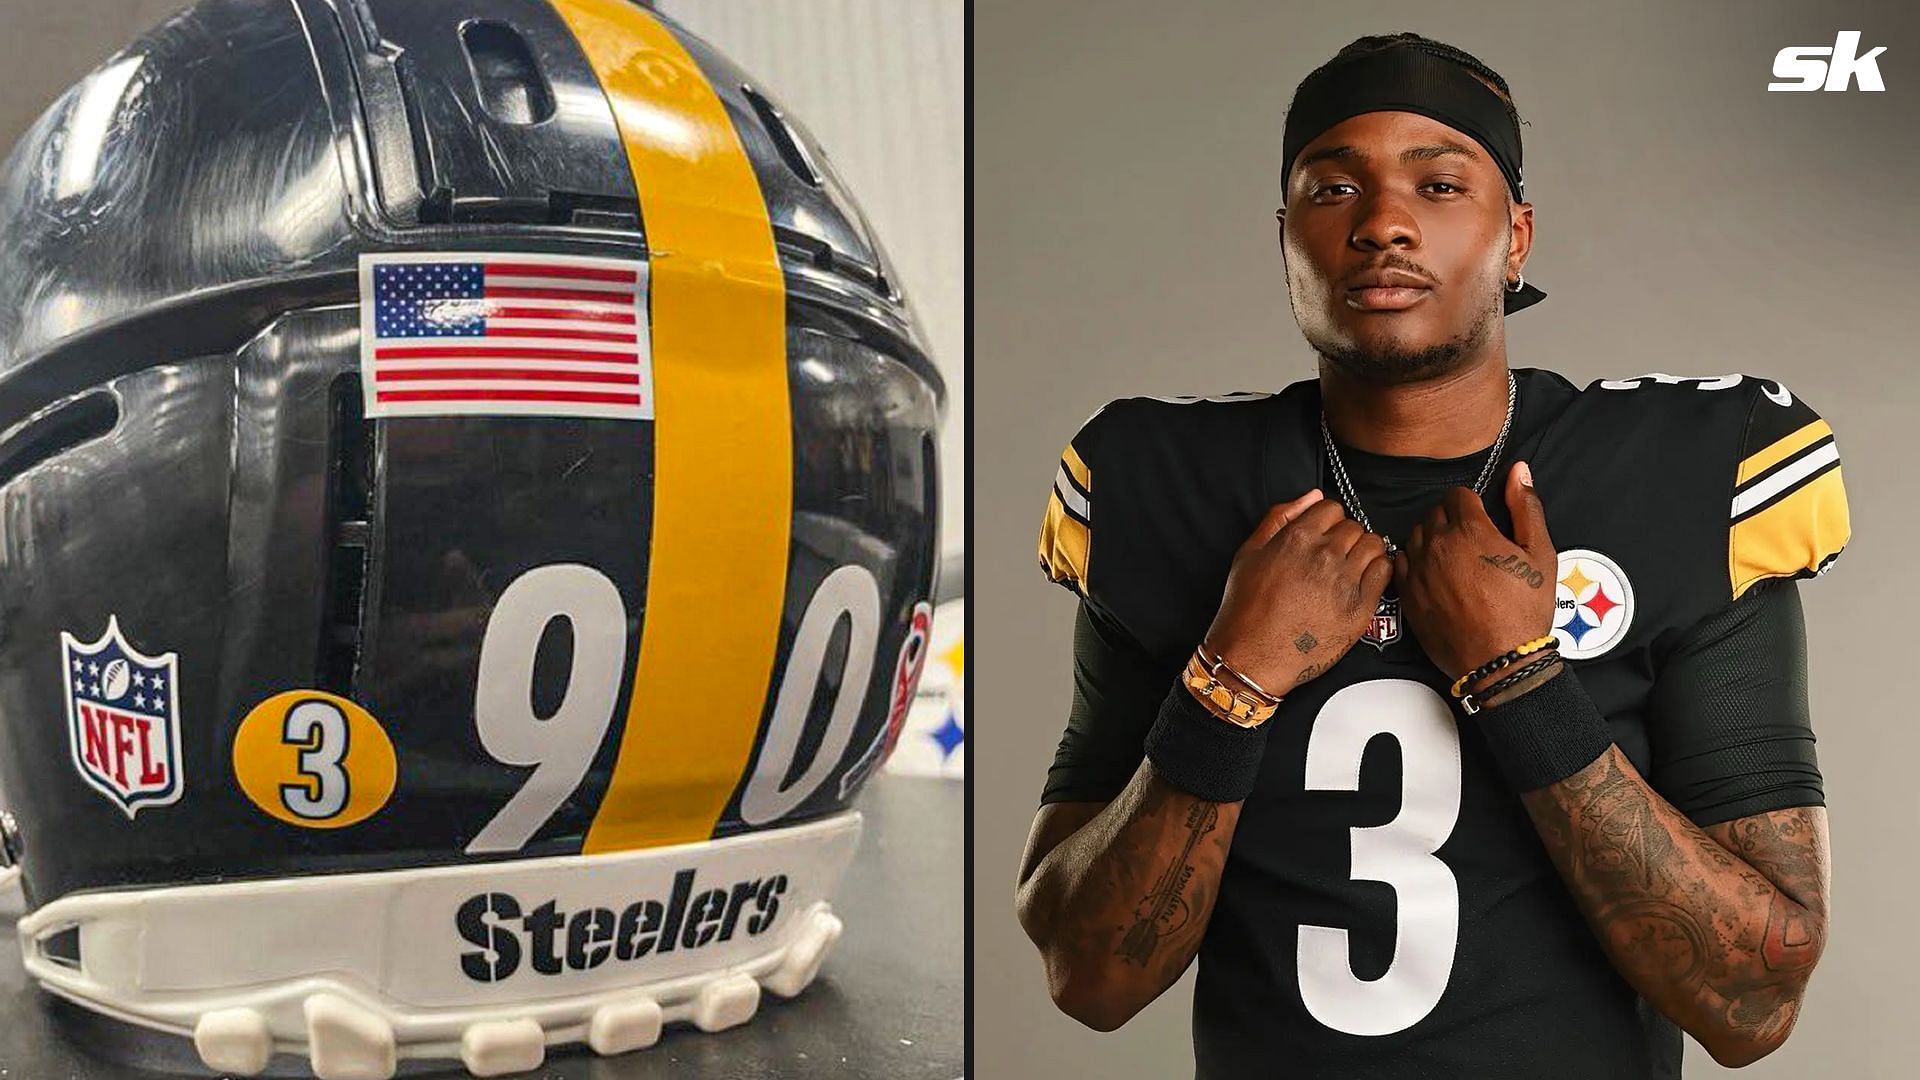 The Steelers will honor the late Dwayne Haskins with number 3 stickers on players